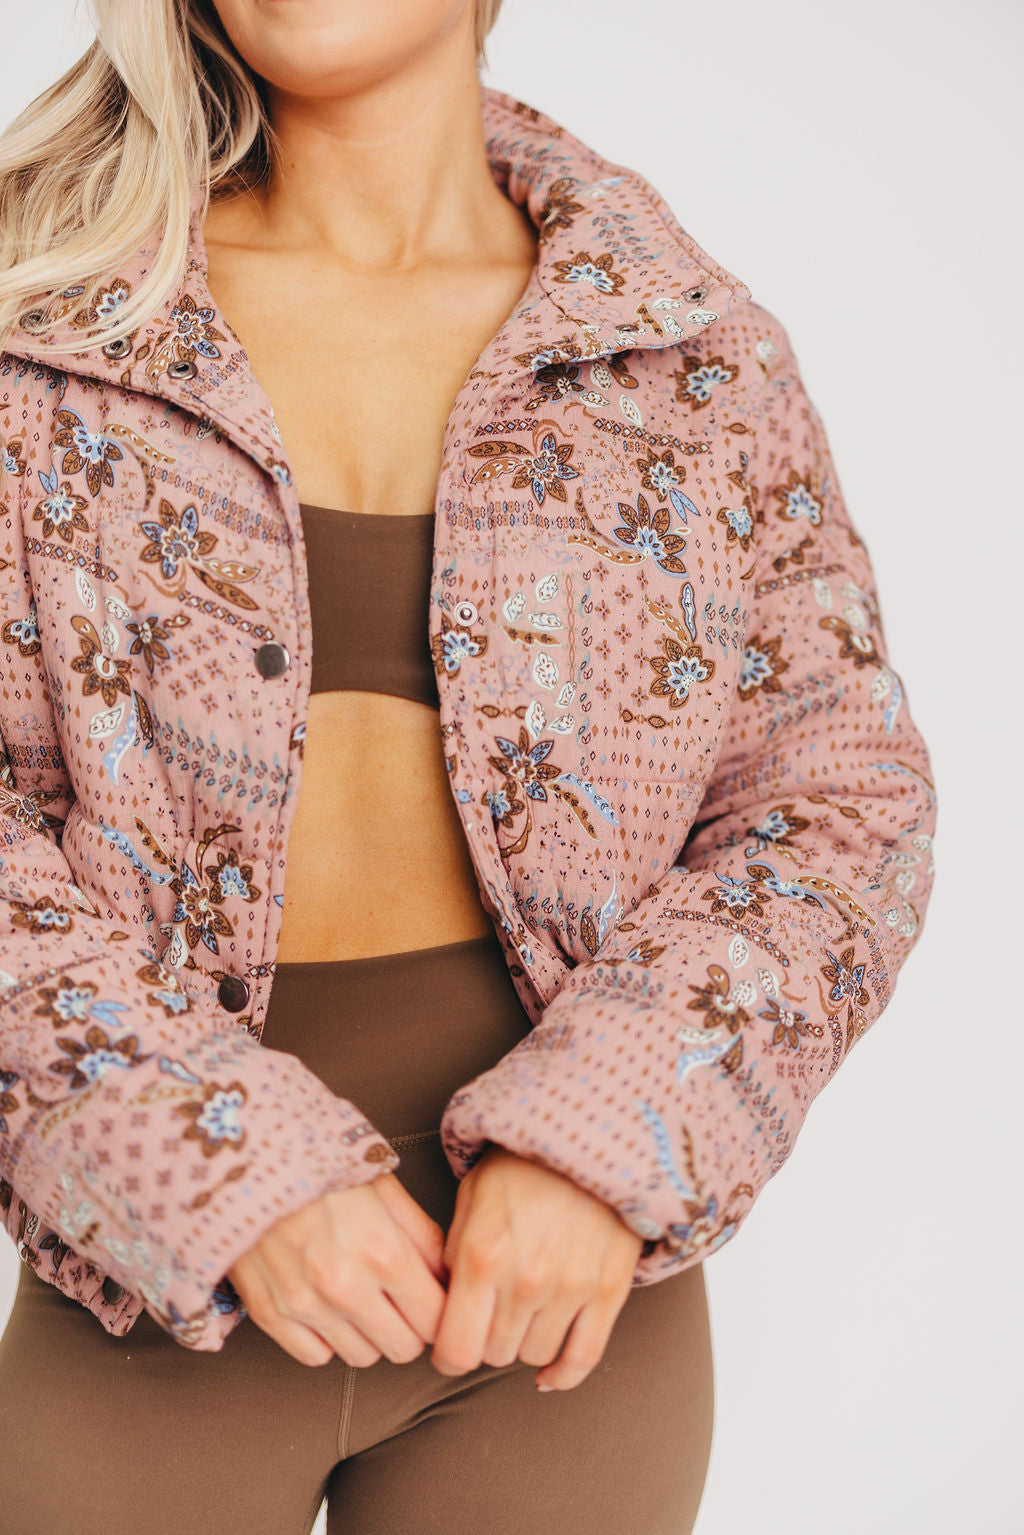 Cullen Plush Snap Button Puffer Jacket in Dusty Mauve Floral